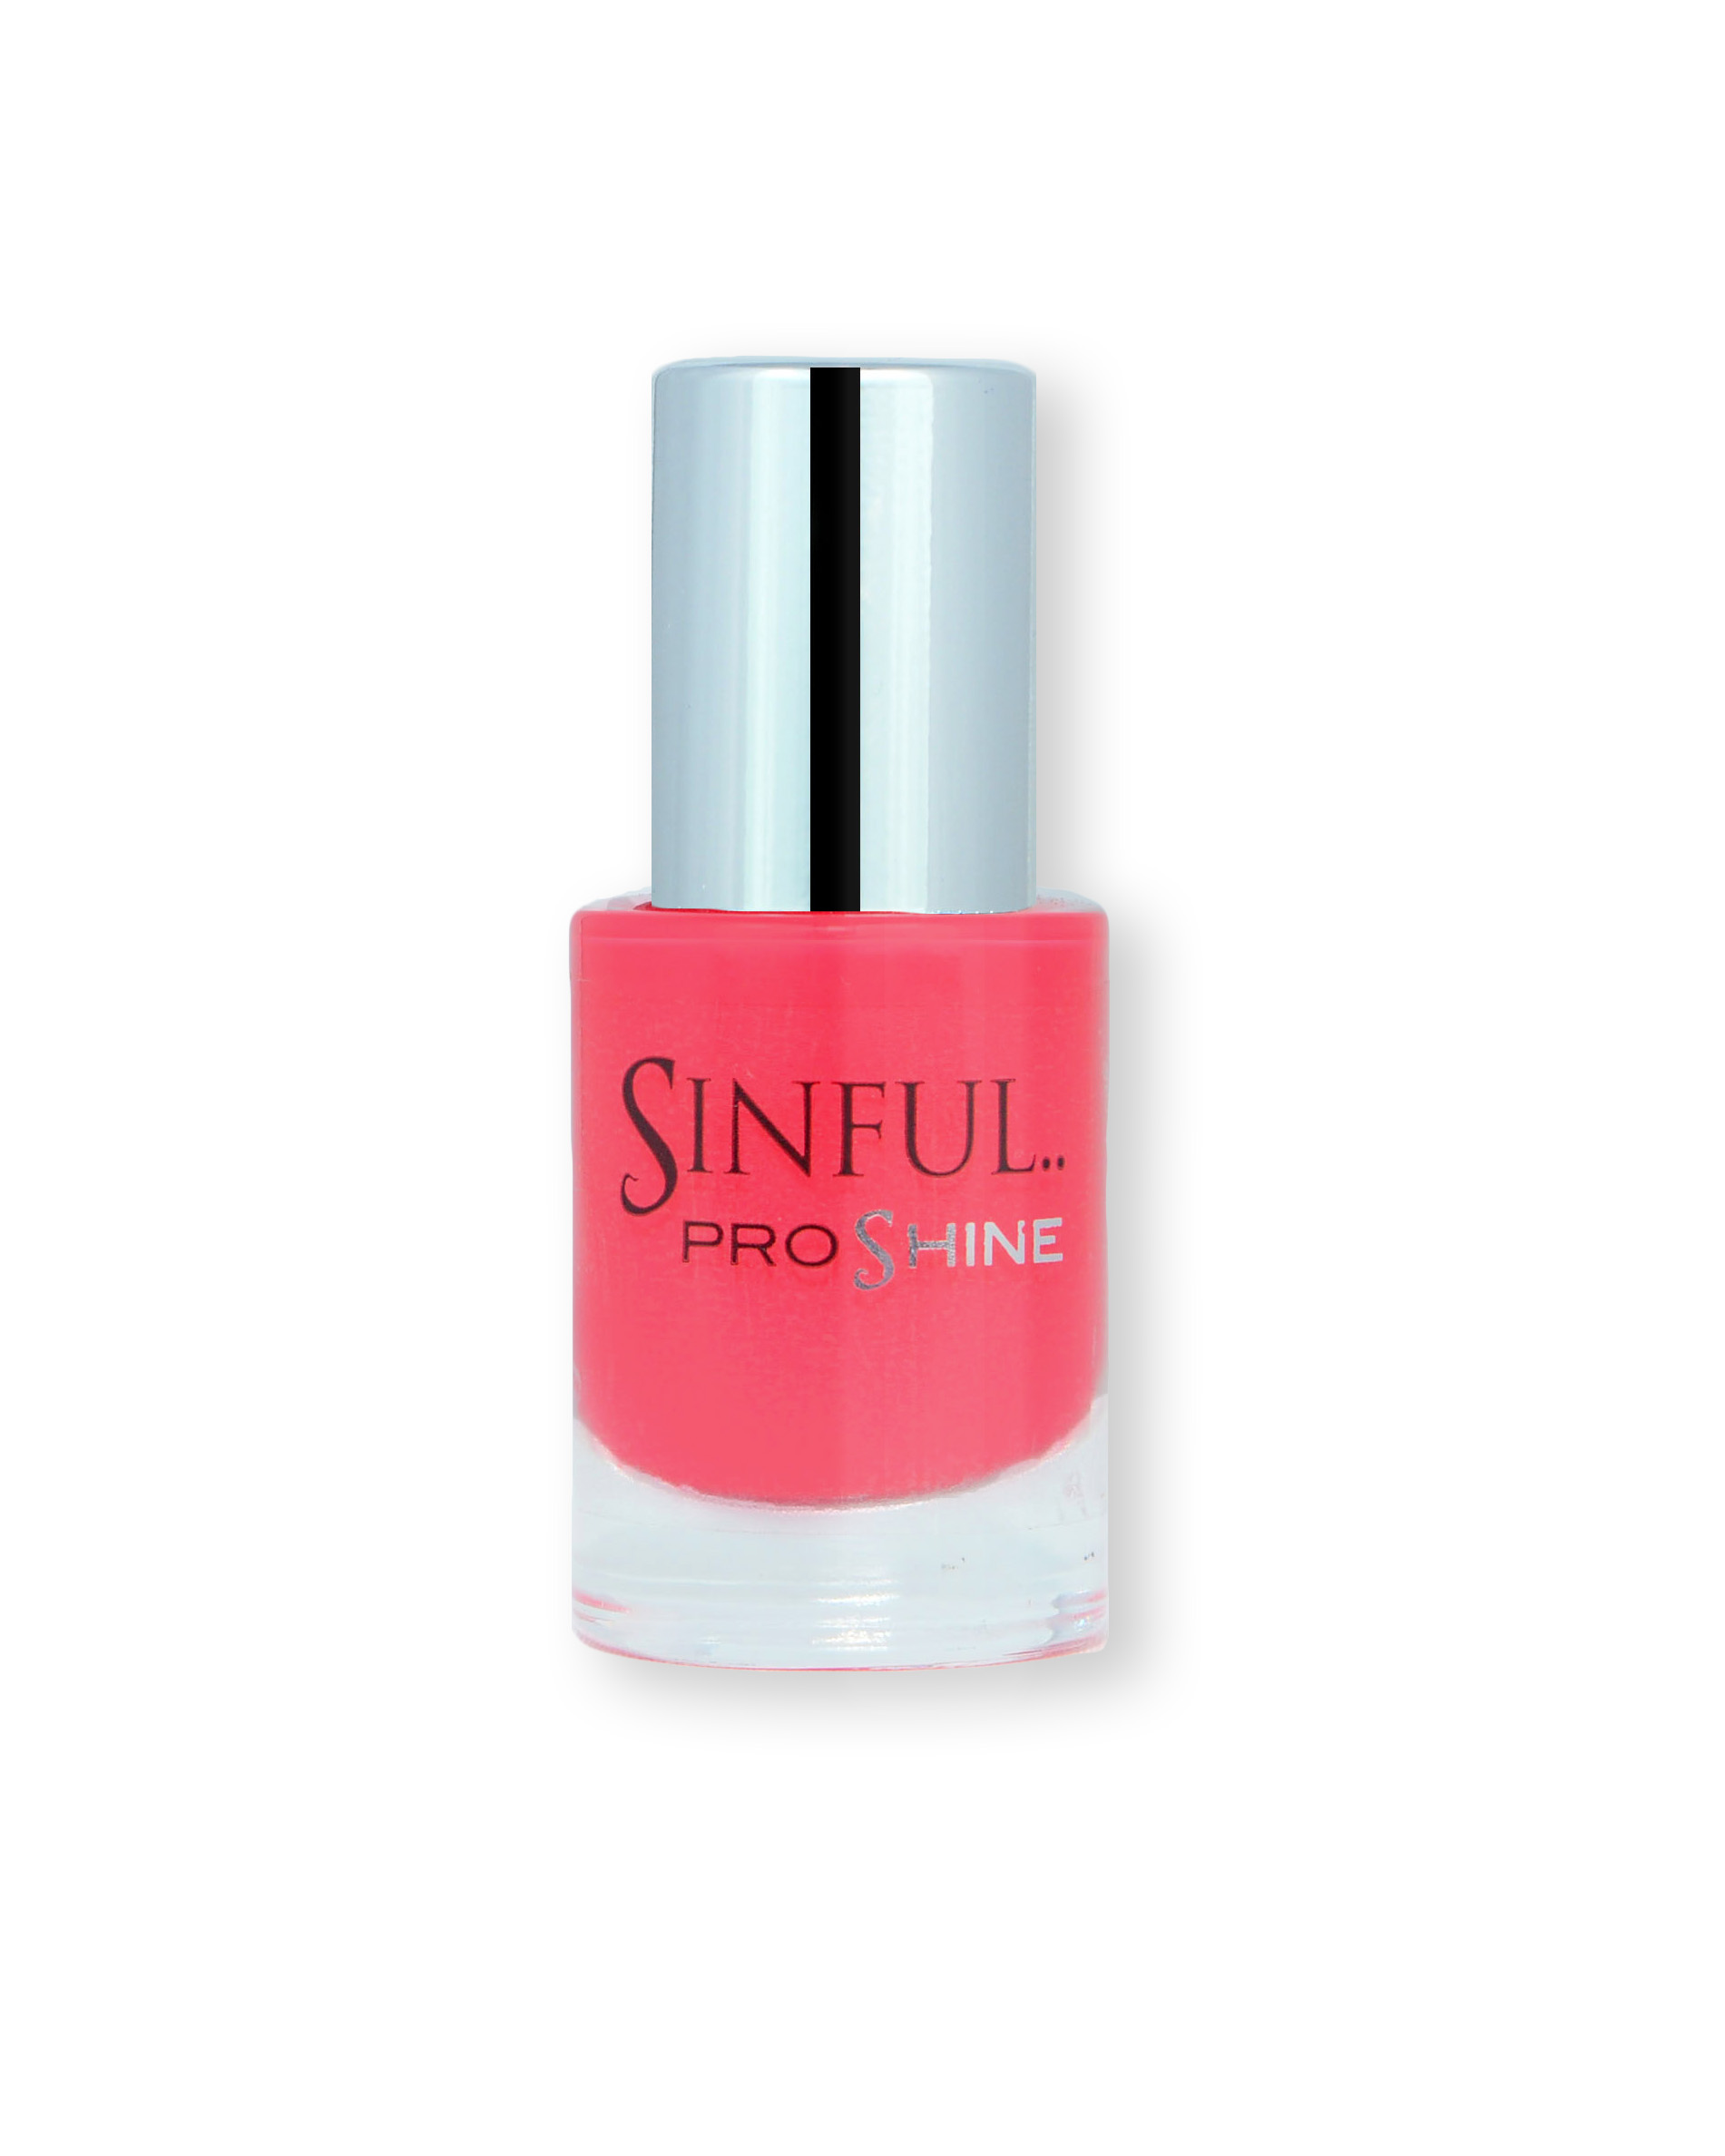 Sinful PROshine is a revolution into top spec imitation gel-like formula, easy application, full coverage and a sleek finish. Spoil yourself with the choice of 42 shades, expertly formulated with the finest grade of pigments. Guilty Pleasure: Hot pink coral with a creme finish